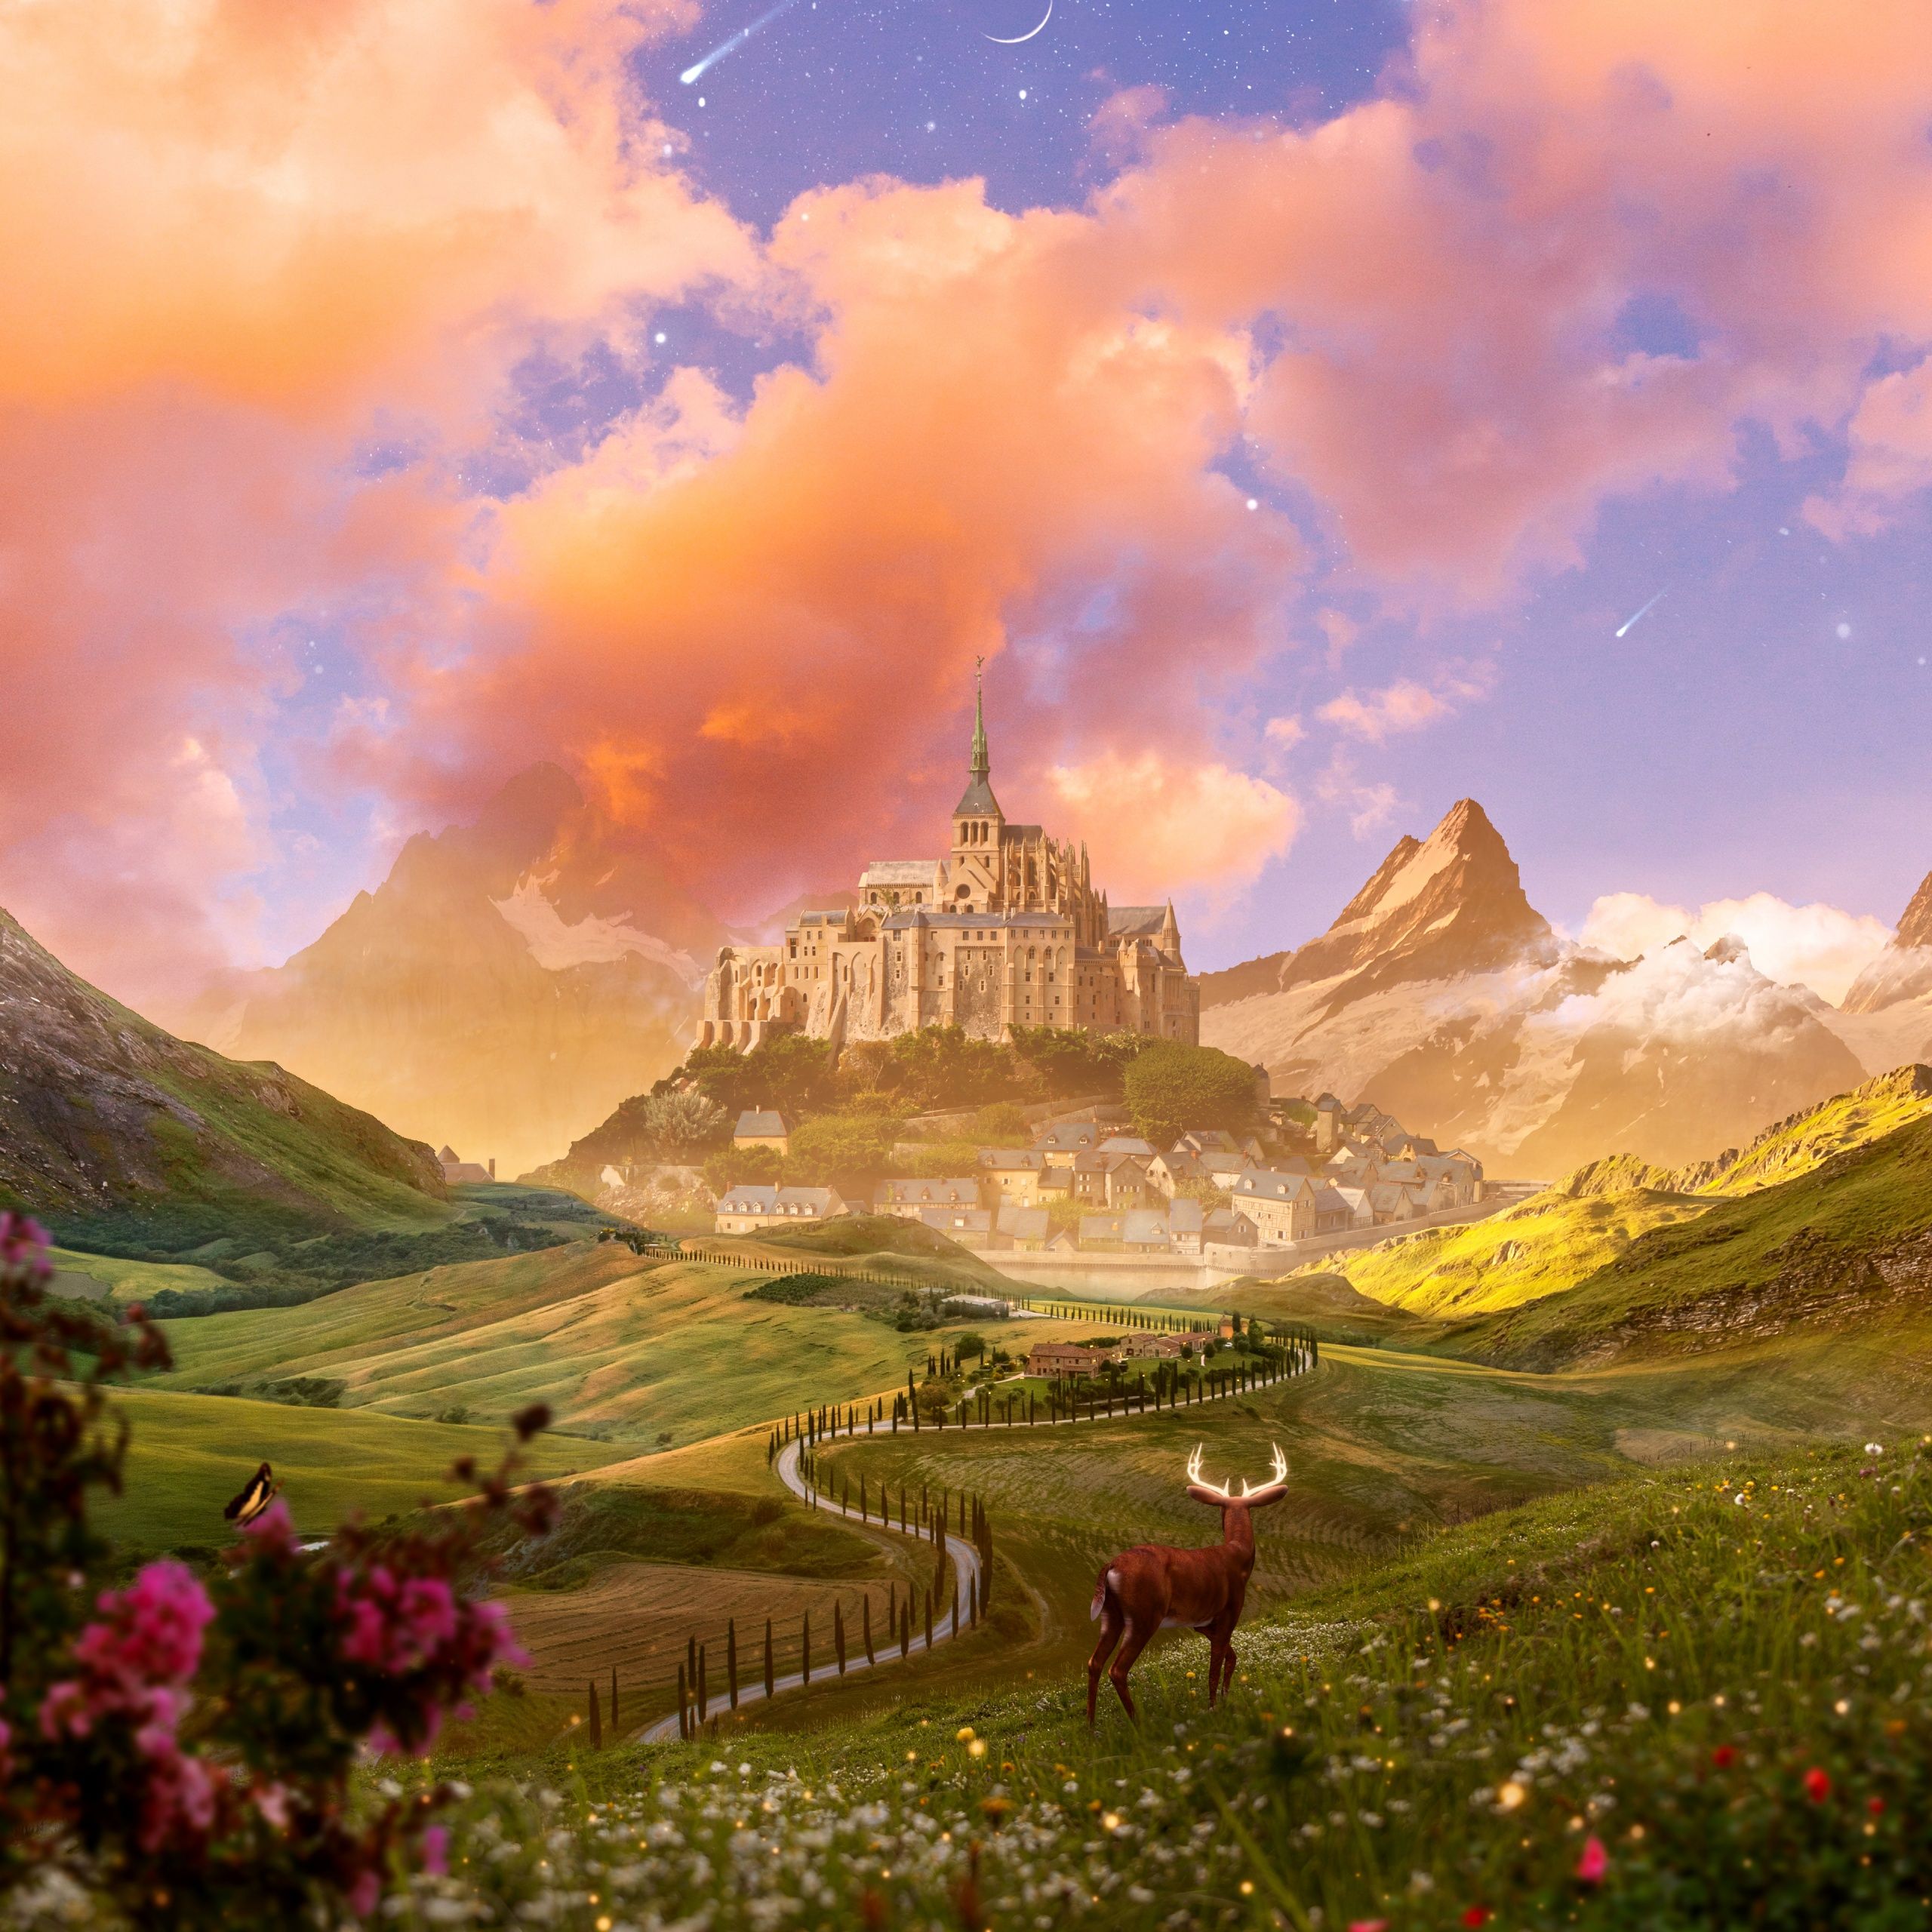 A fantasy castle in the mountains with a deer and a girl - Castle, landscape, architecture